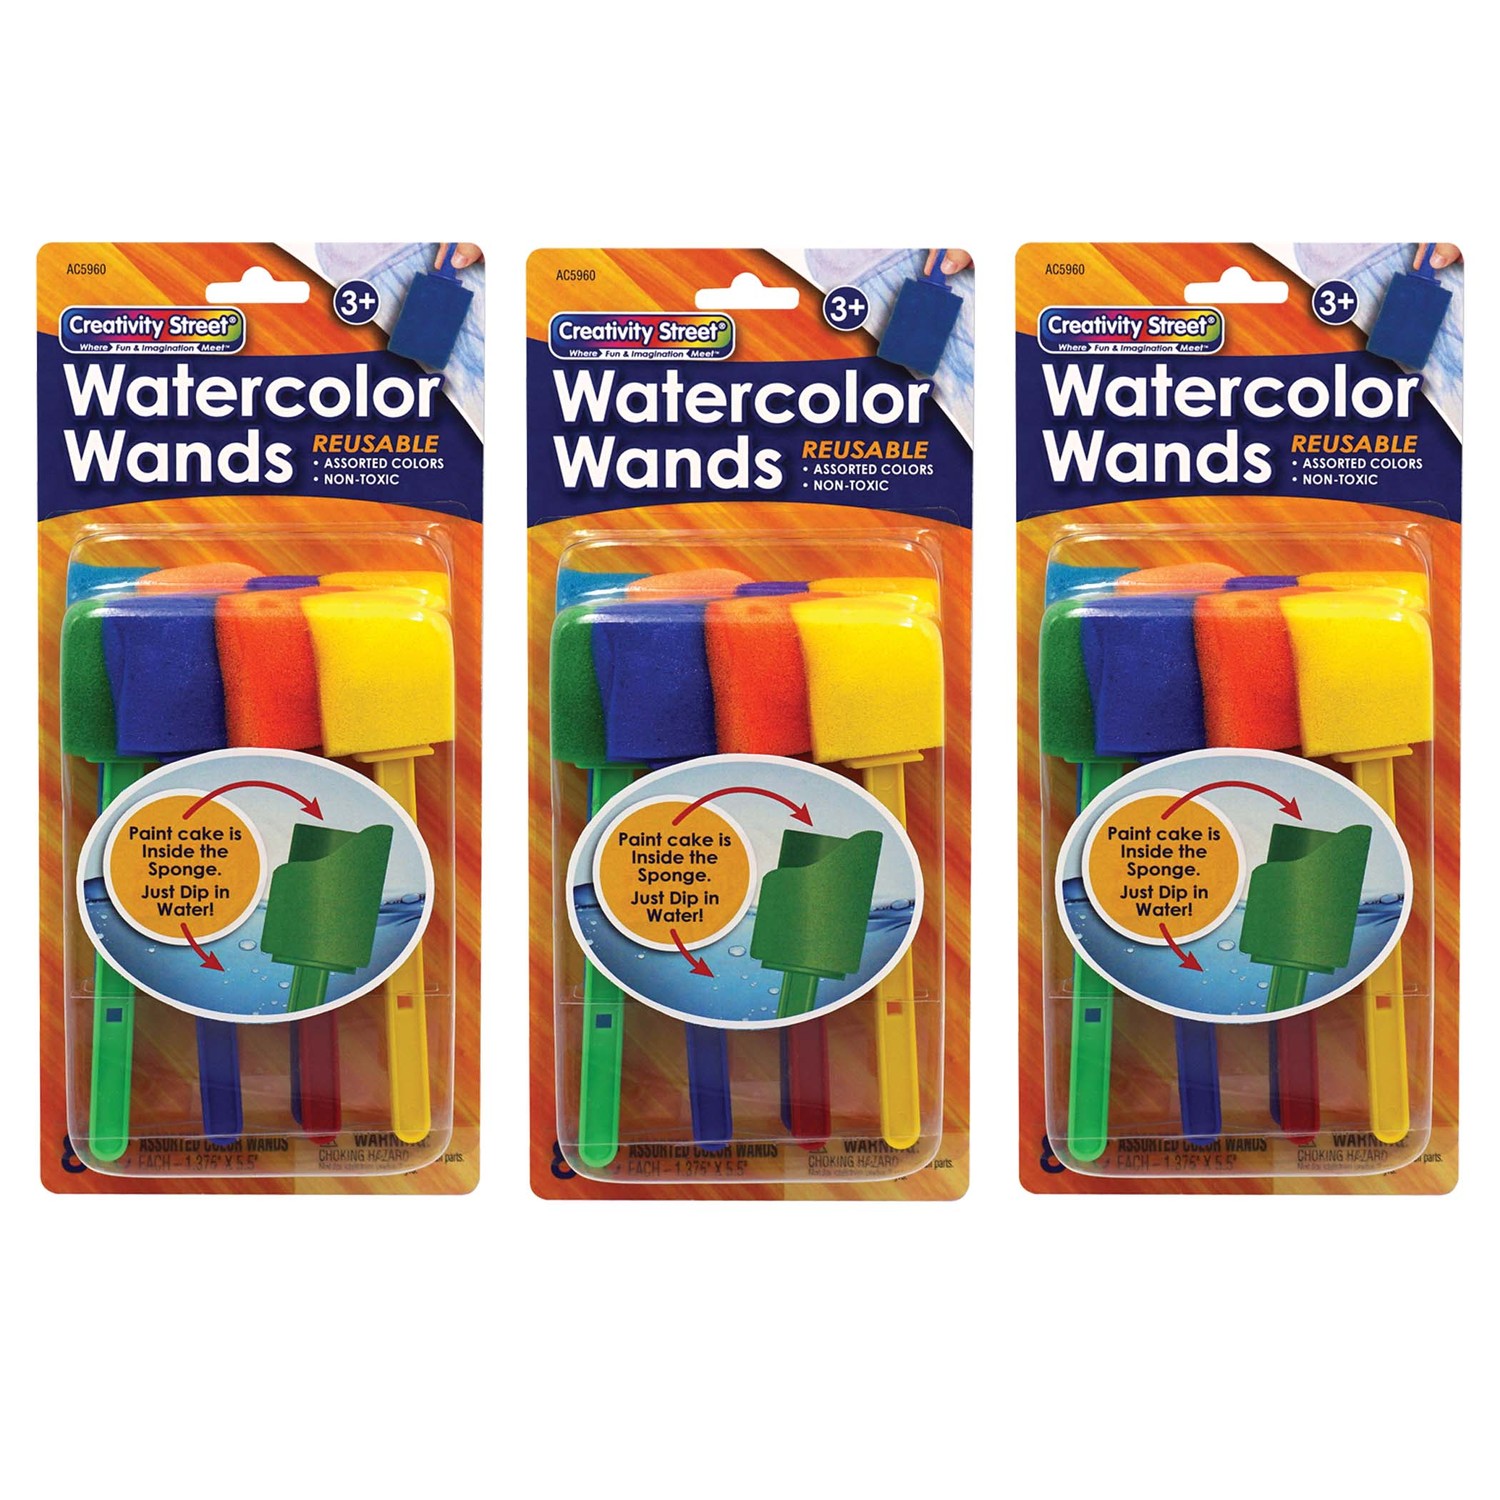 Watercolor Wands with Paint, 8 Assorted Colors, 1-3/8" x 5-1/2", 8 Per Pack, 3 Packs